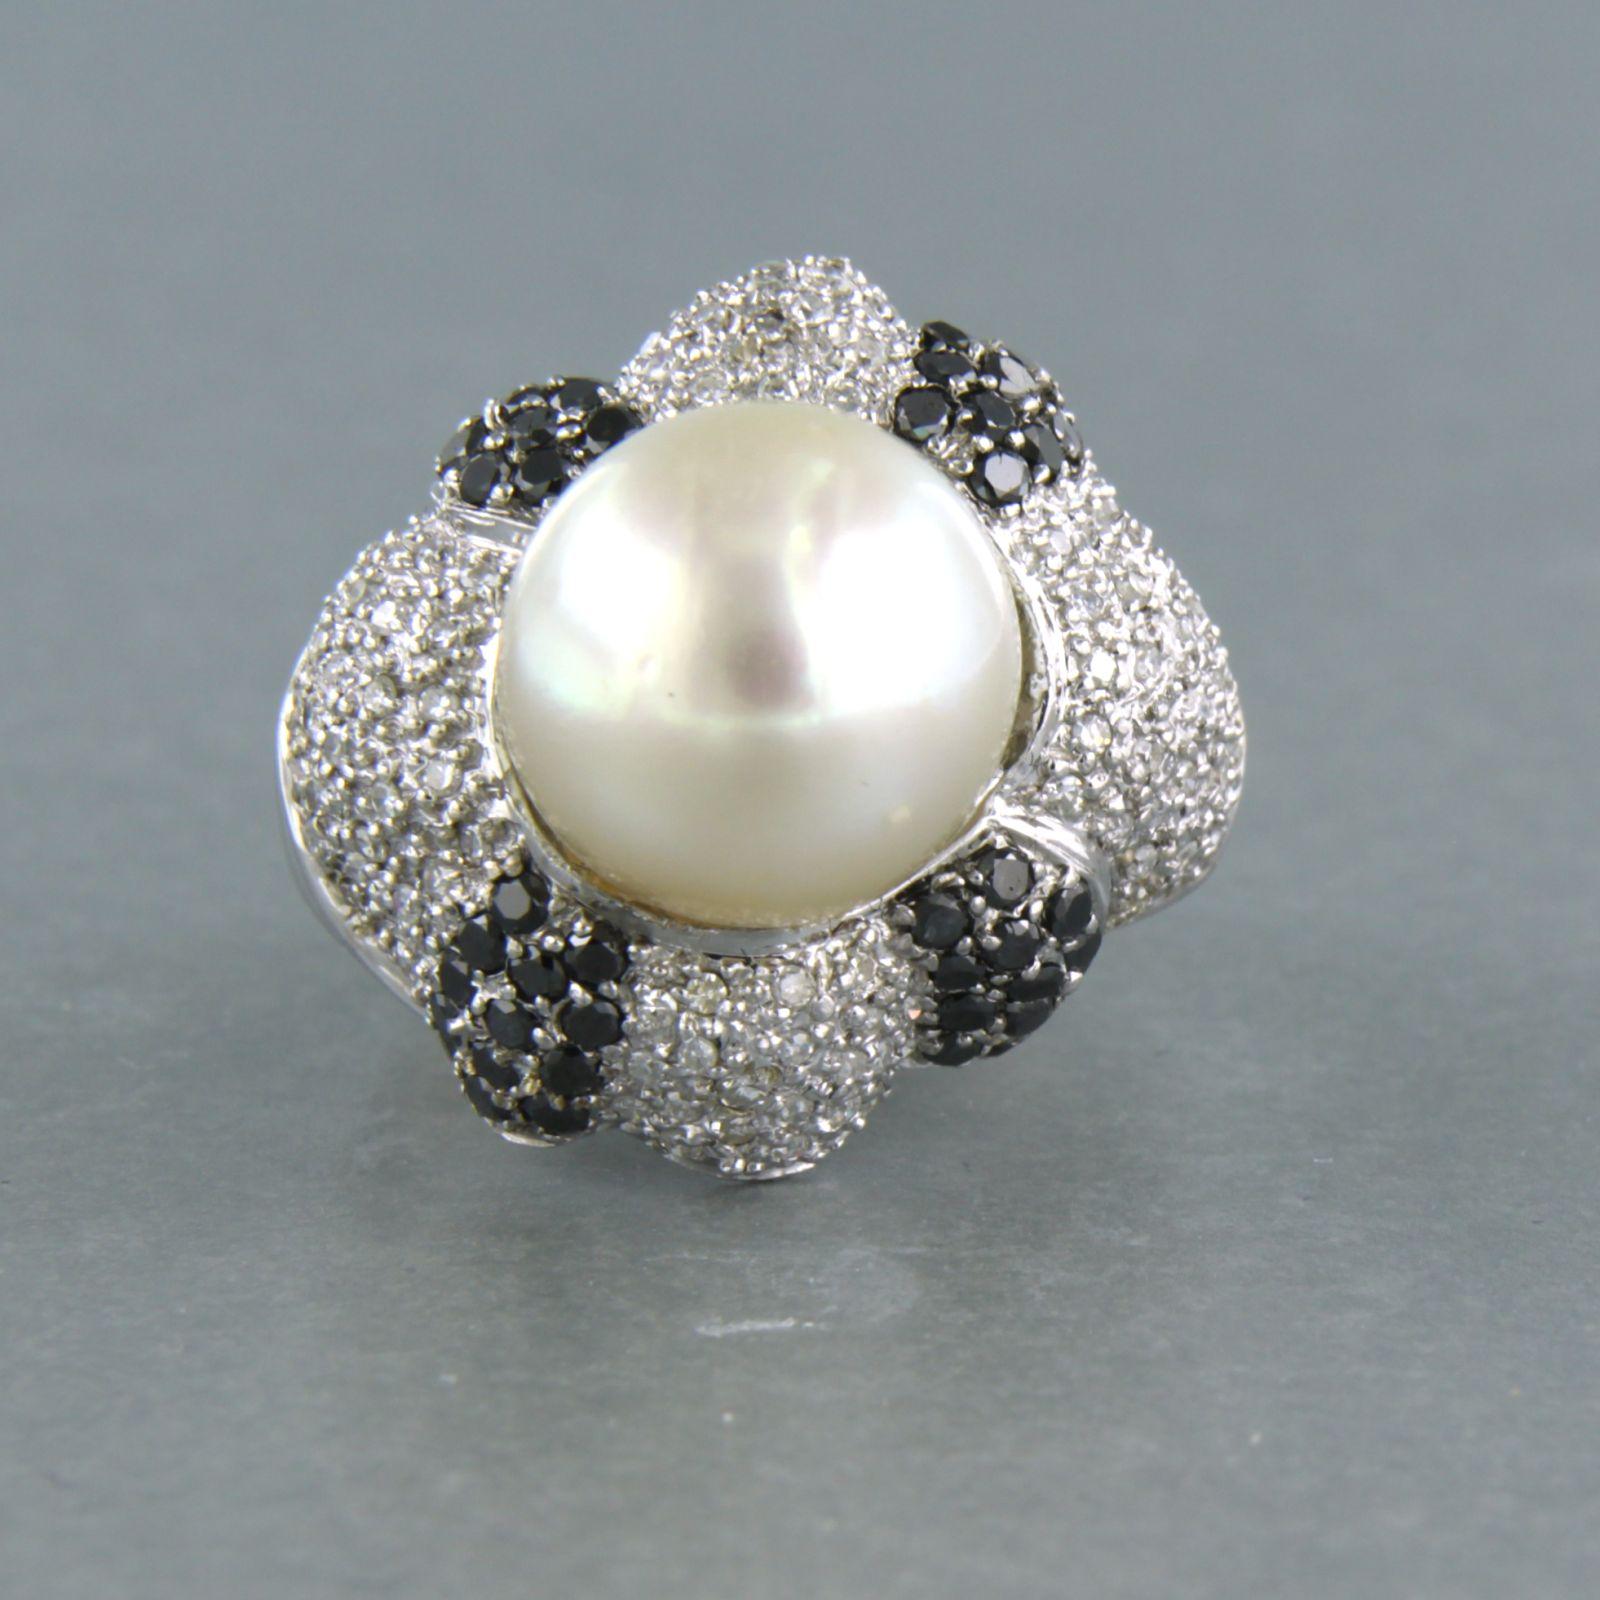 14k white gold ring set with a pearl and black brilliant cut and white single cut diamonds. 1.50ct - ring size U.S. 7 - EU. 17.25(54)

detailed description:

The top of the ring is 2.1 cm wide and 1.4 mm high

Ring size U.S. 7 - EU. 17.25(54), ring